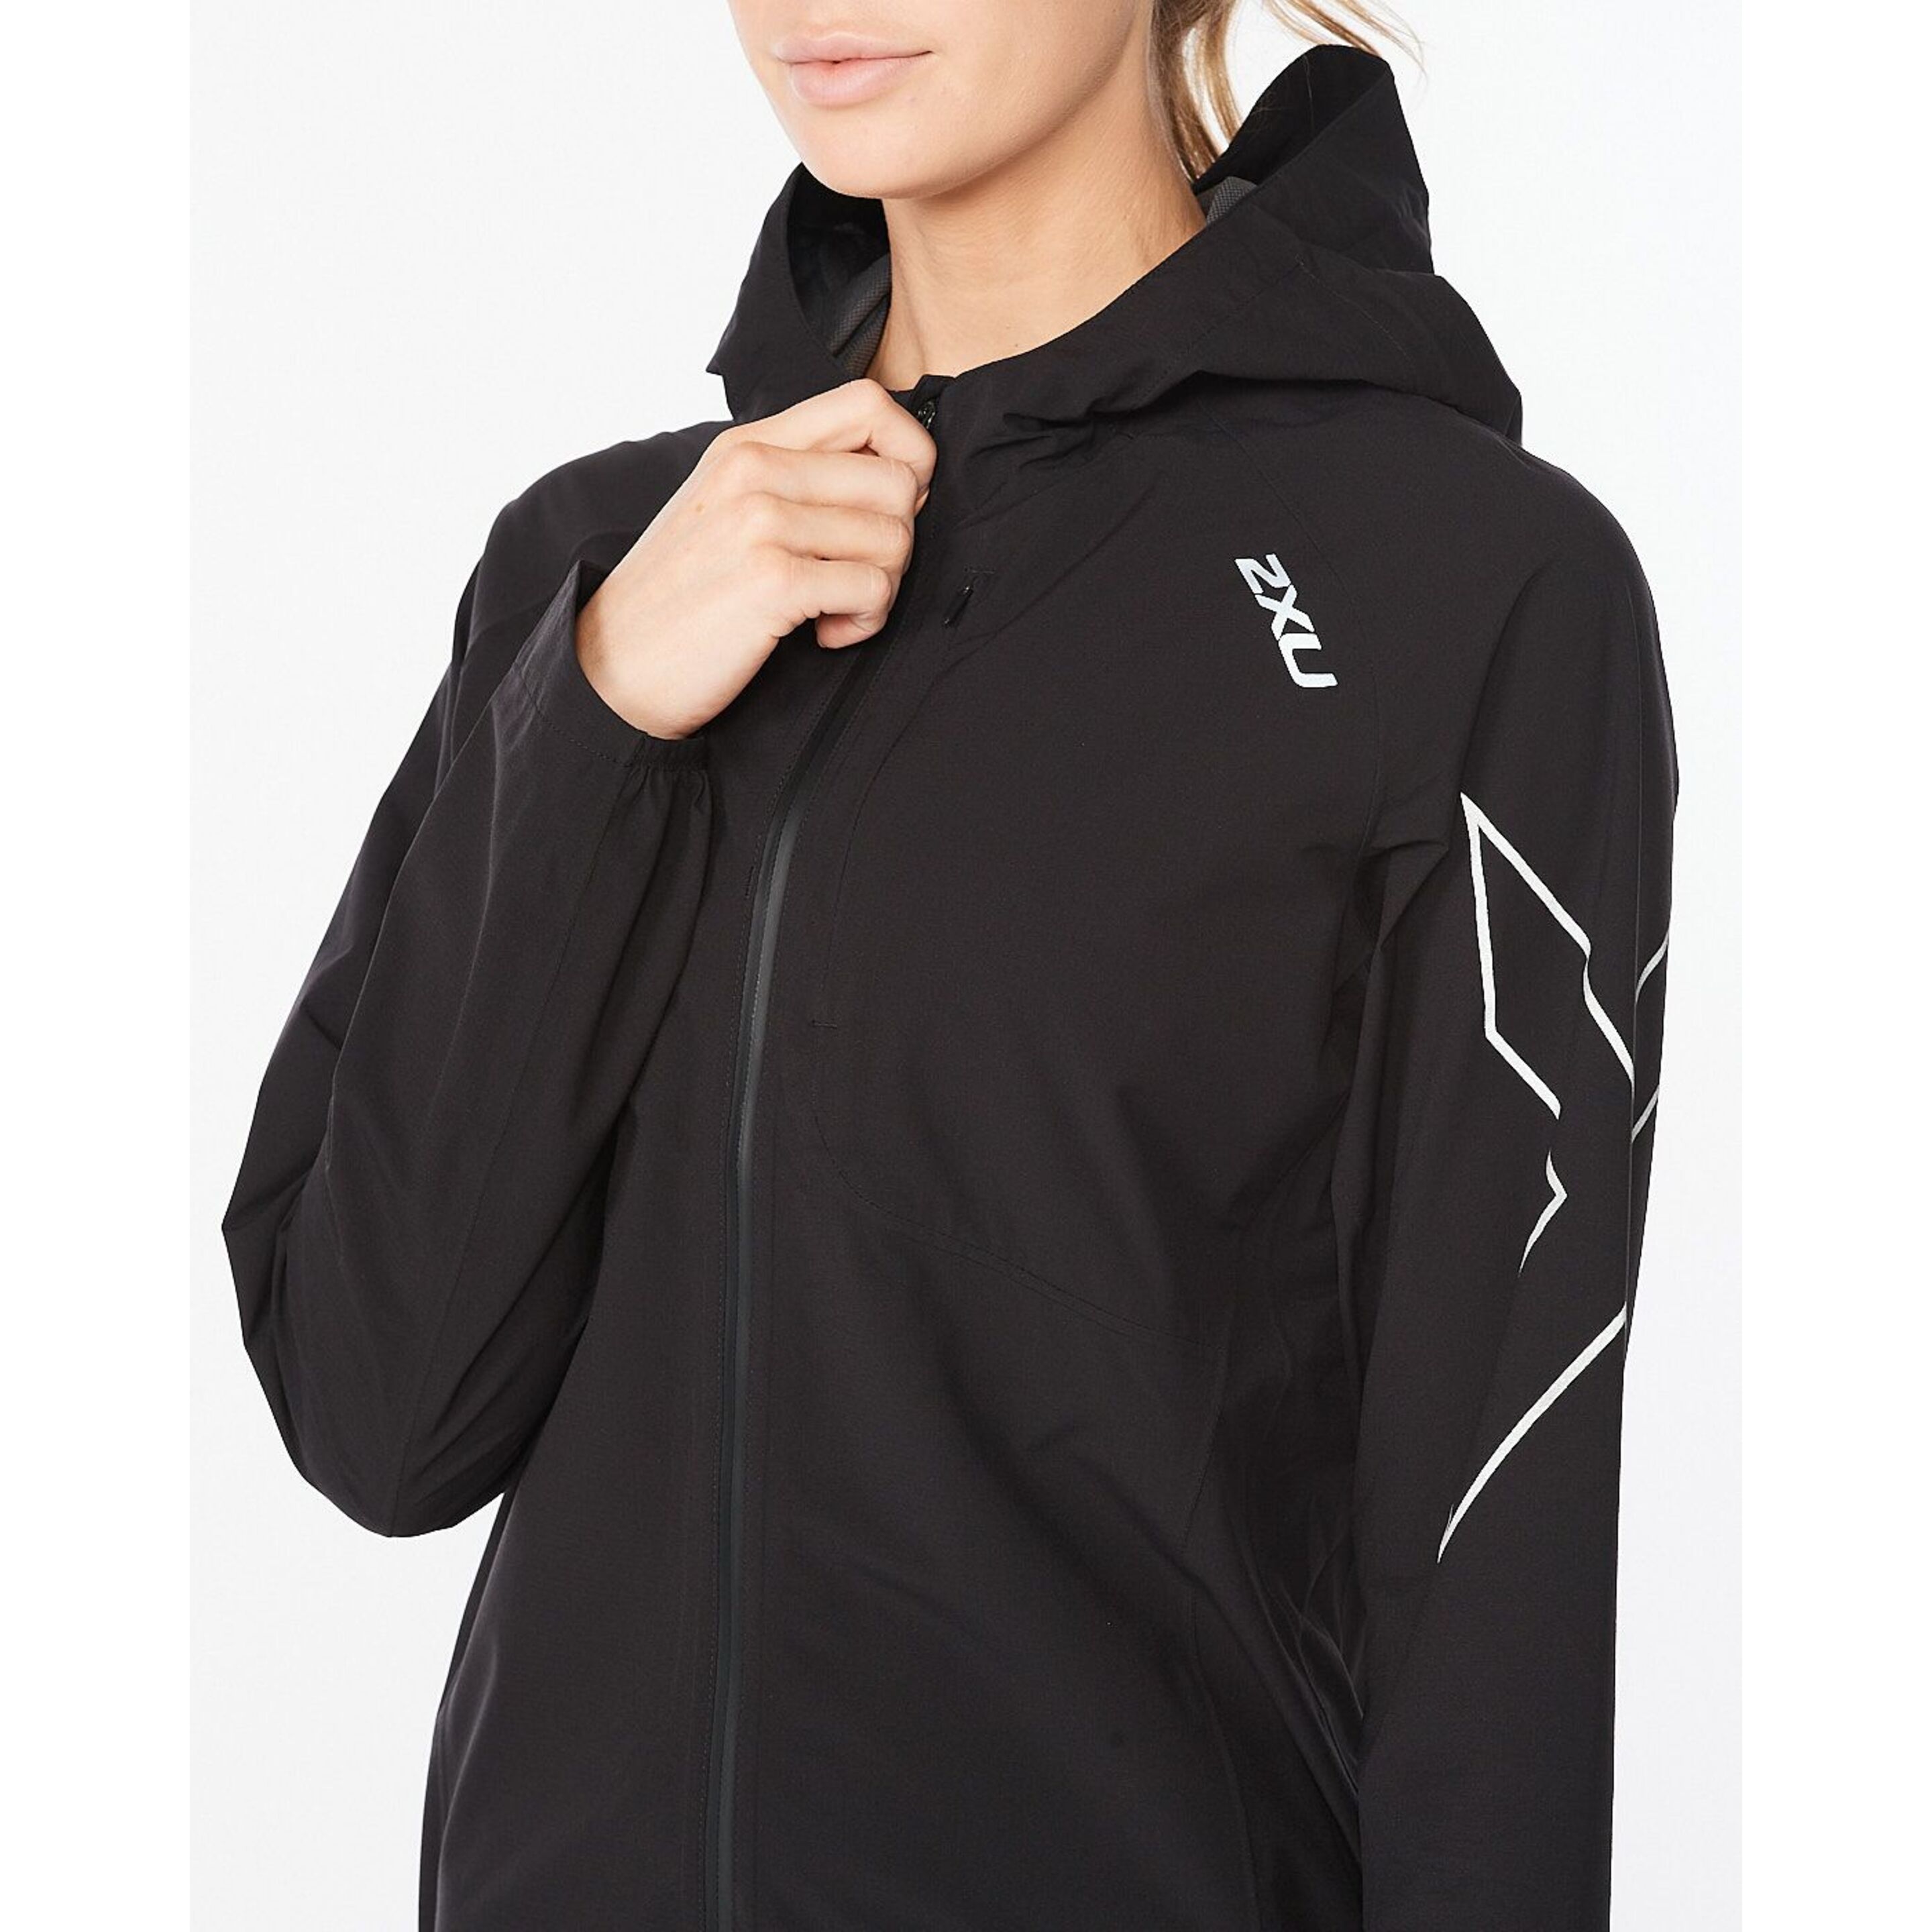 Chaquetas 2xu Light Speed Impermeable